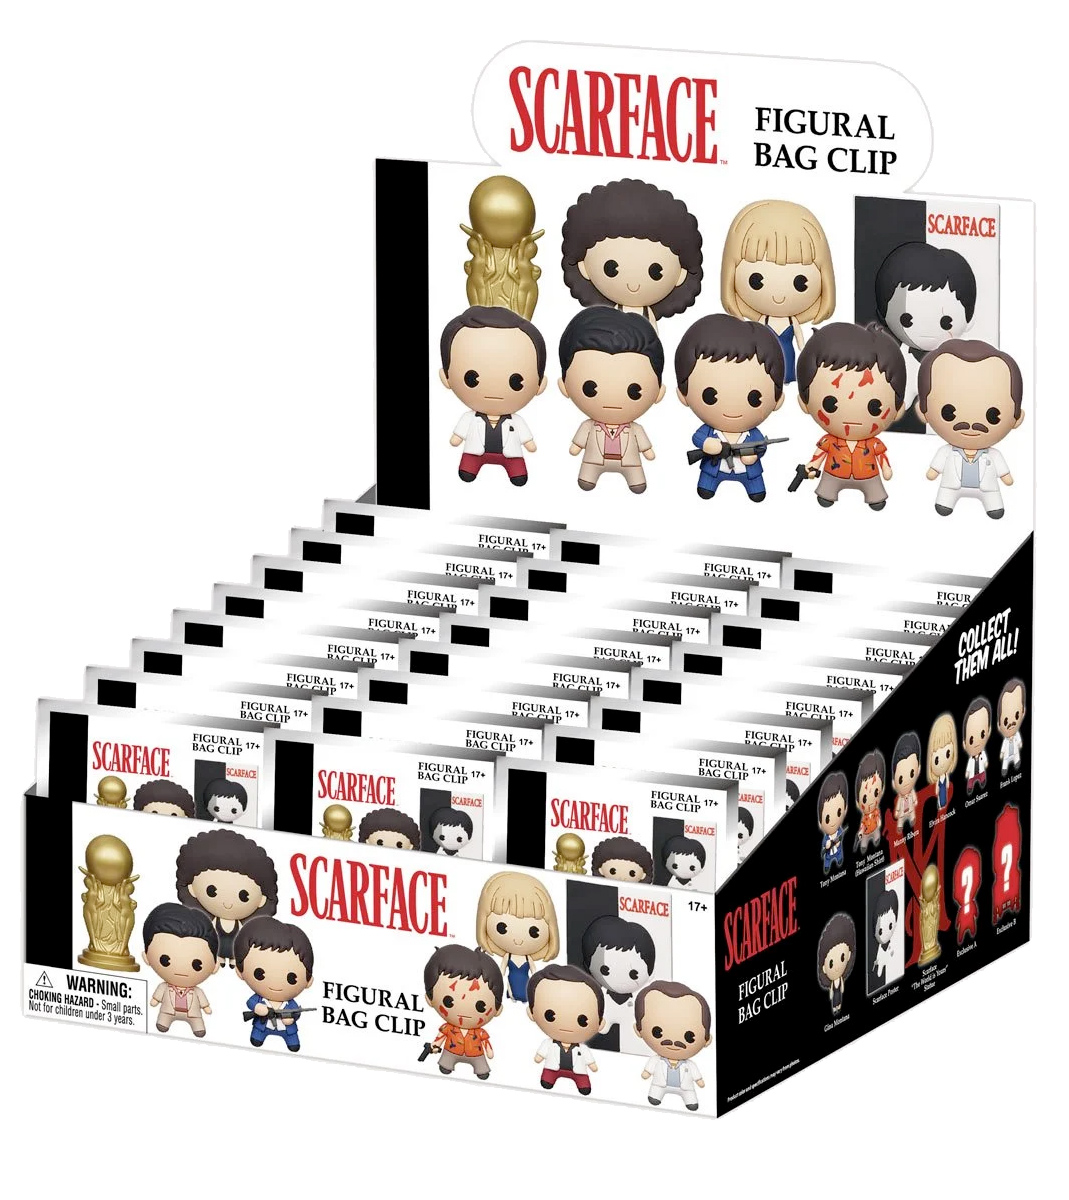 Scarface 3D Figural Bag Clips Keychains from the Al Pacino and Brian De Palma Movie